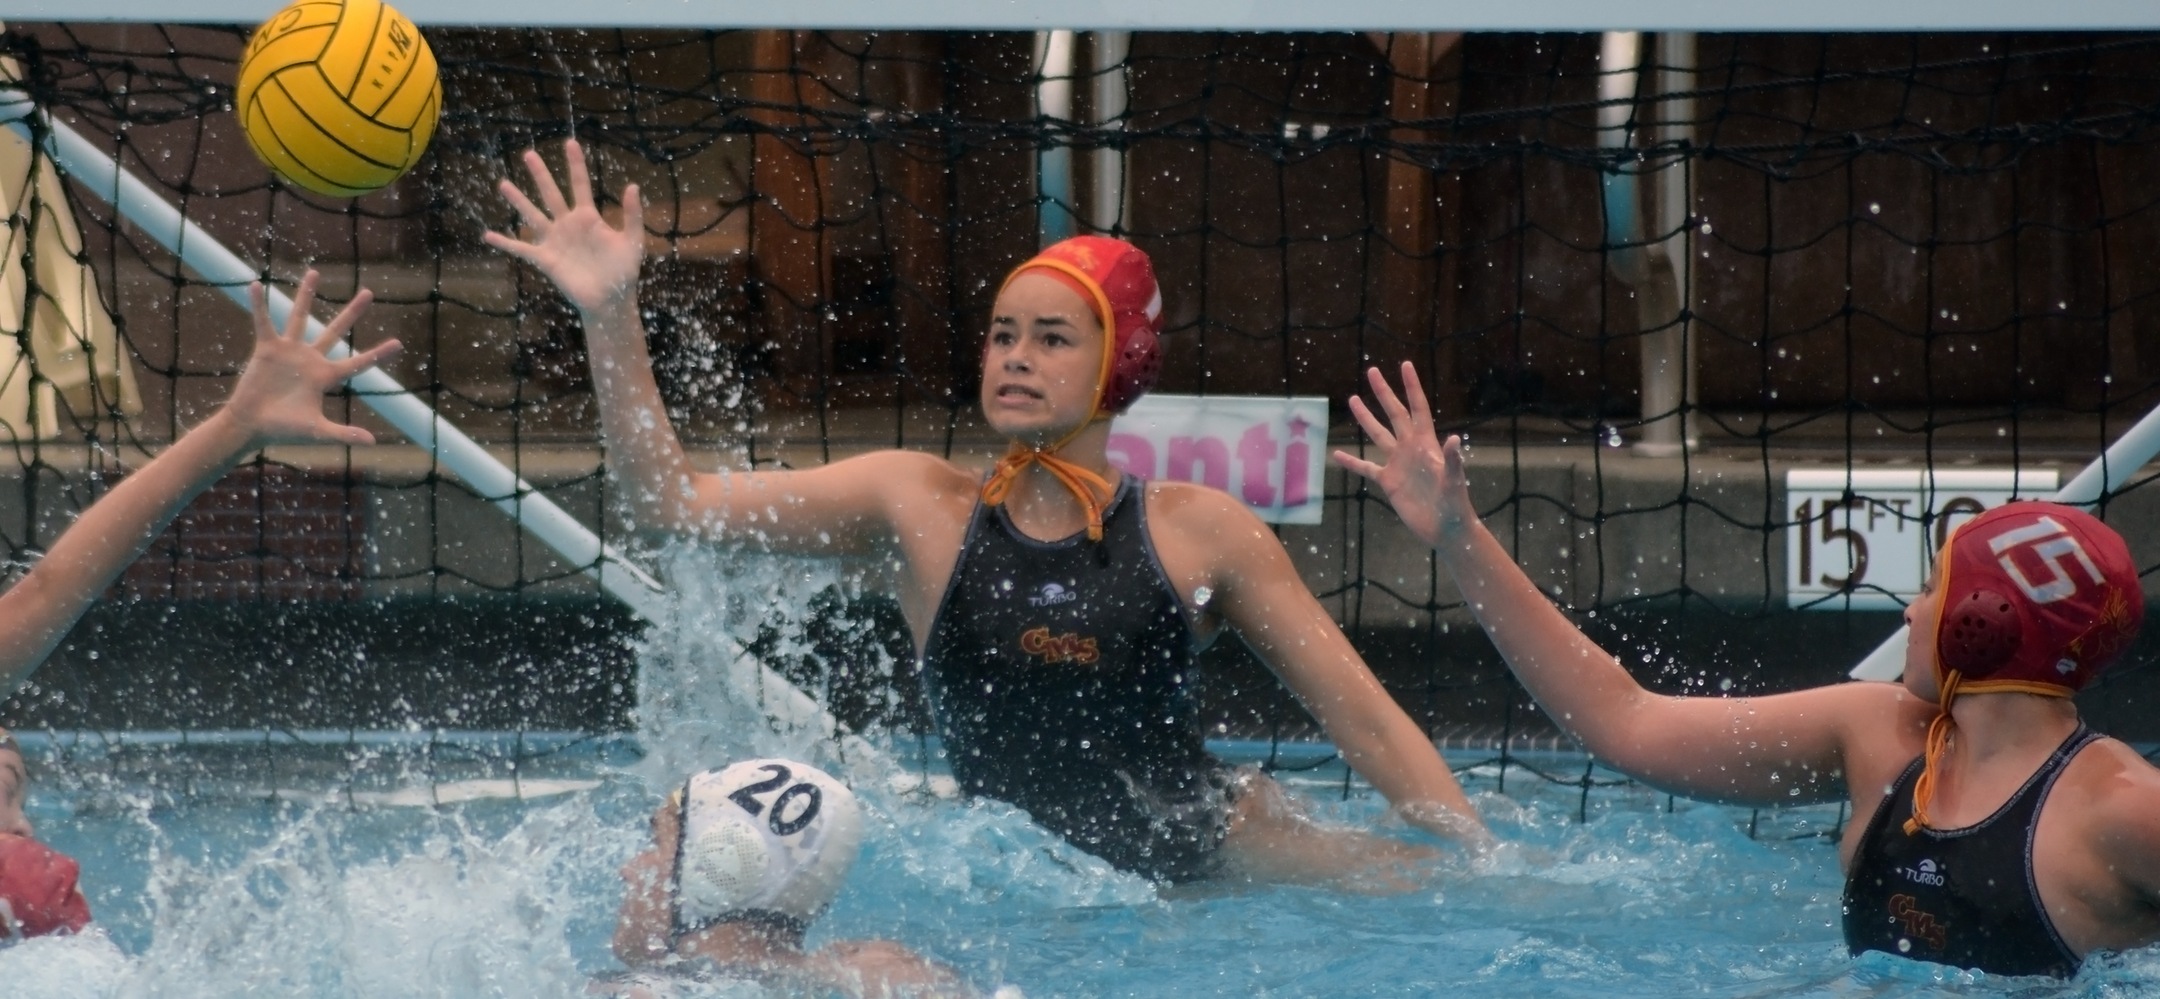 Jessica Salaz had eight saves and five steals to help CMS to a 7-6 road win over Redlands